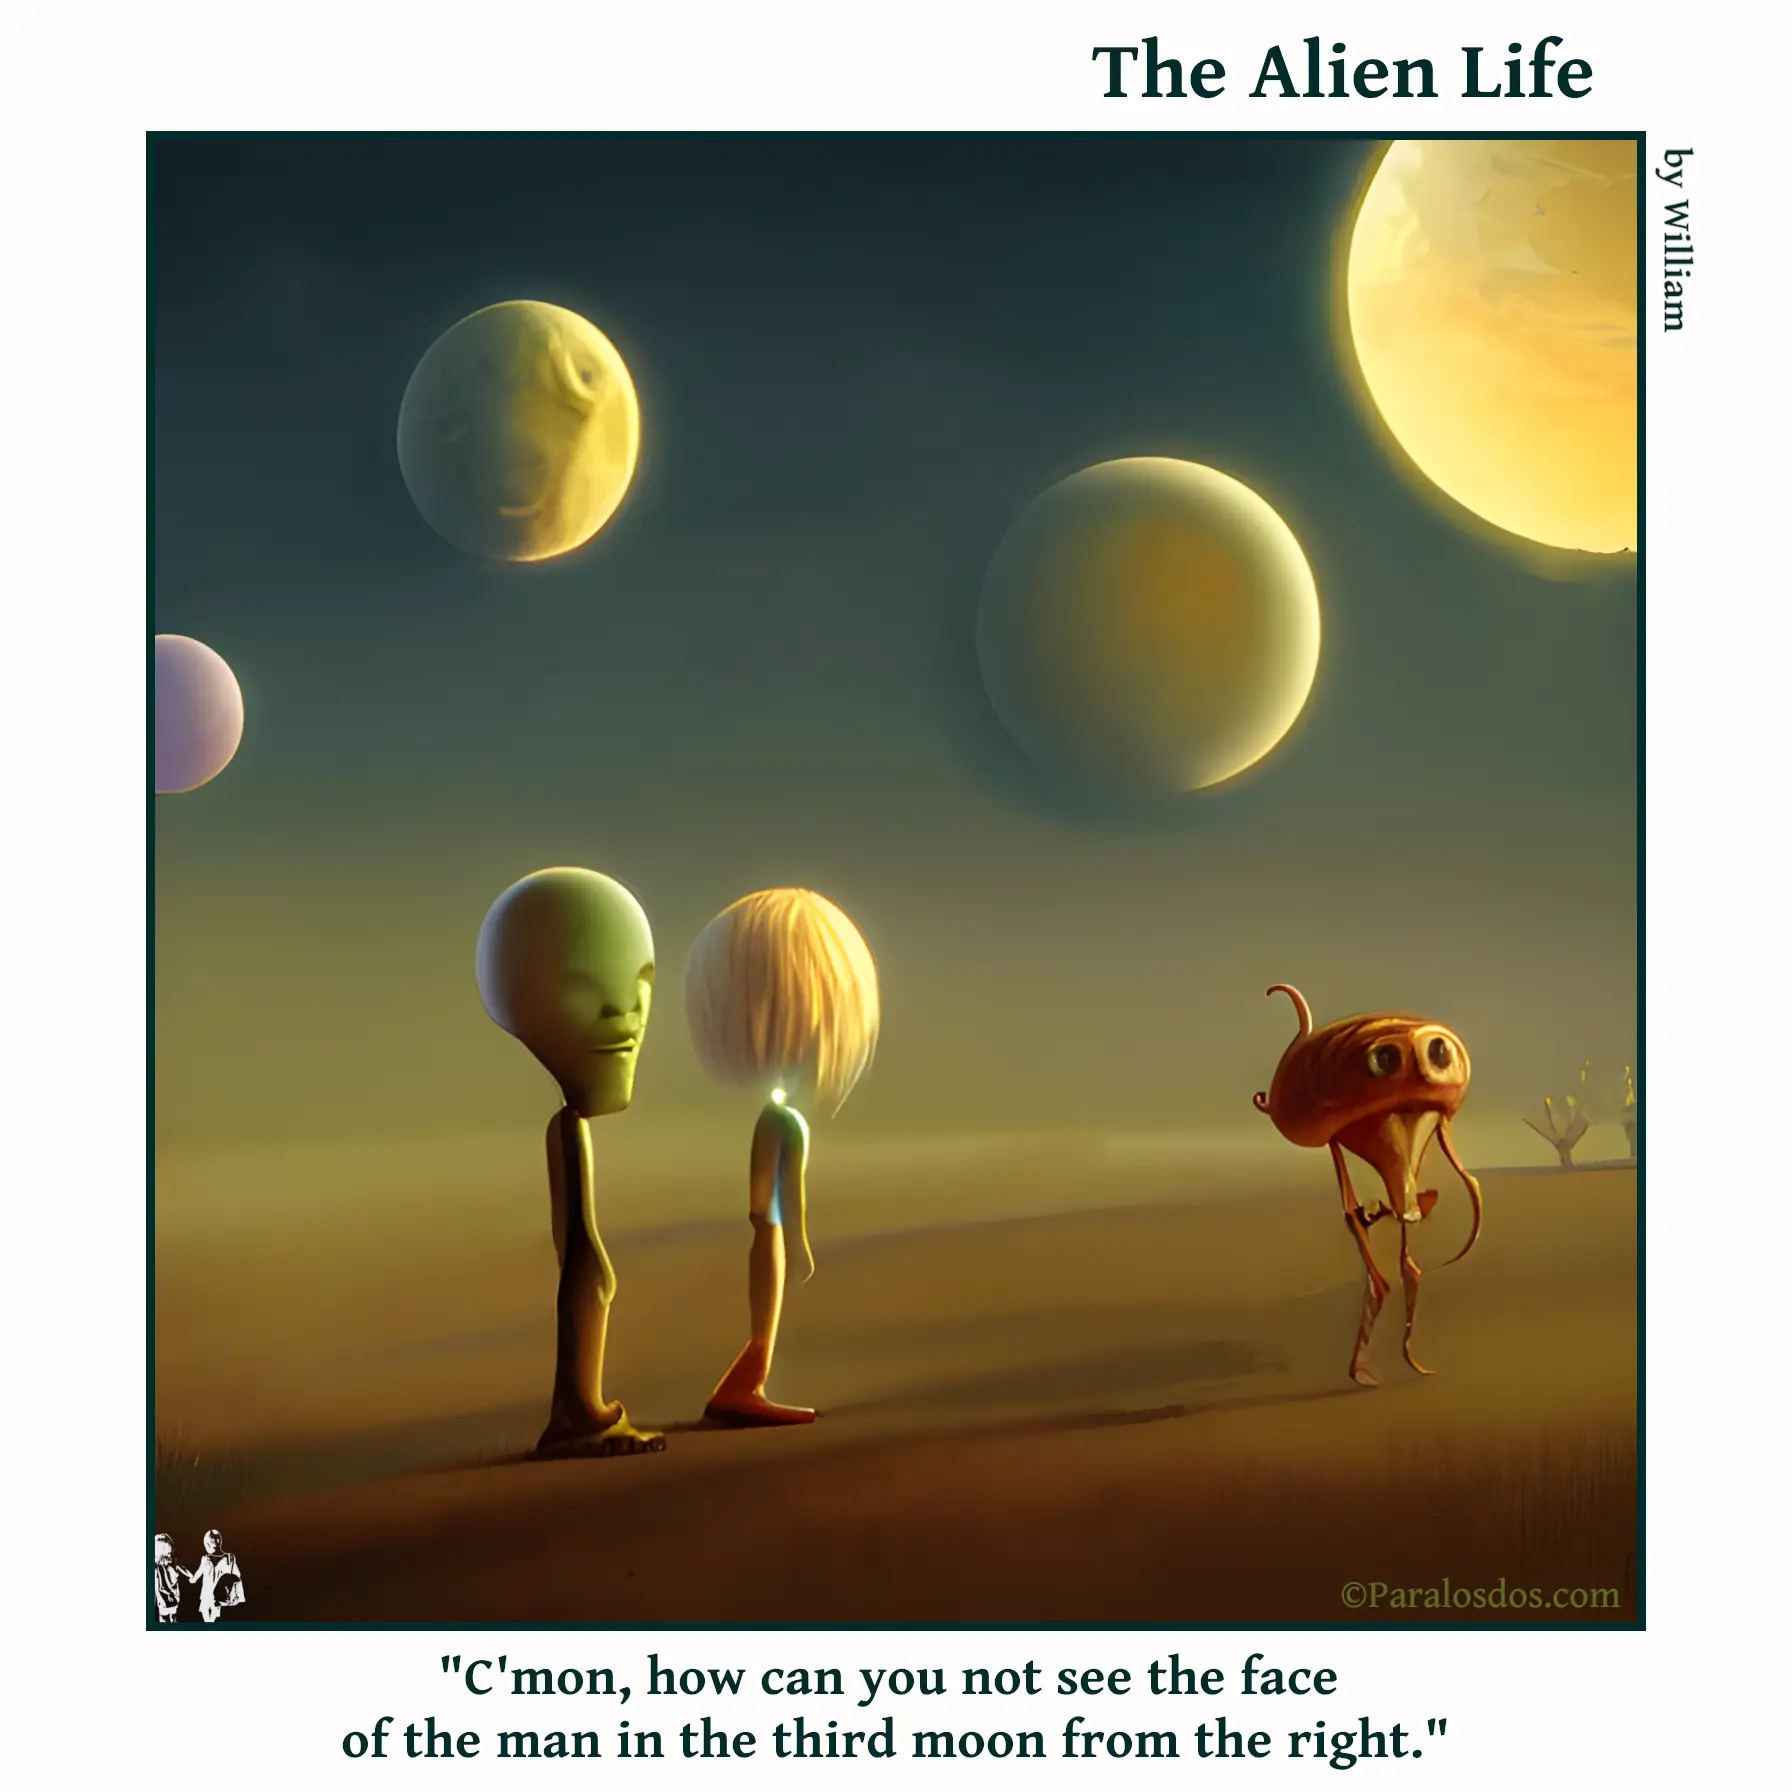 The Alien Life, one panel Comic. Two human looking aliens are standing beside a robot. There are four moons in the sky. One of the moons has a vague face in it. The caption reads: "C'mon, how can you not see the face of the man in the third moon from the right."